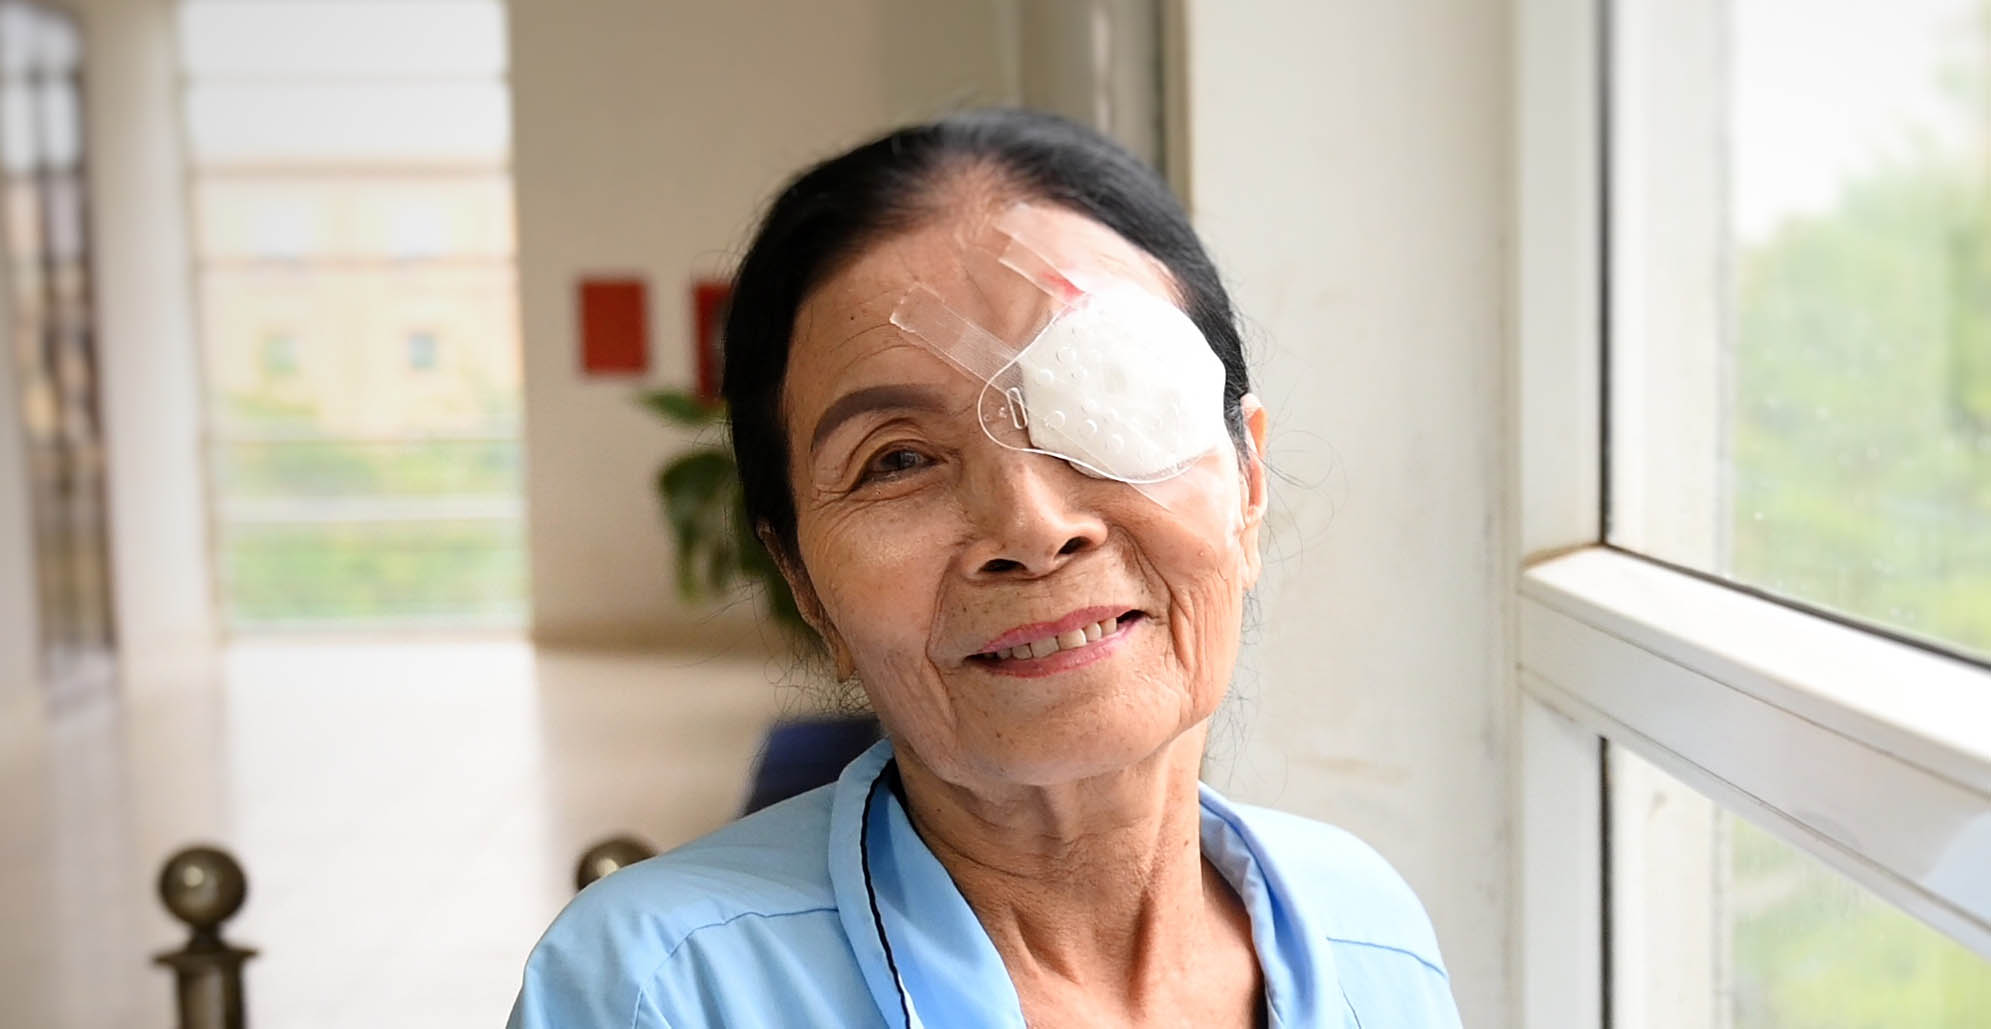 Patient with Eye Patch